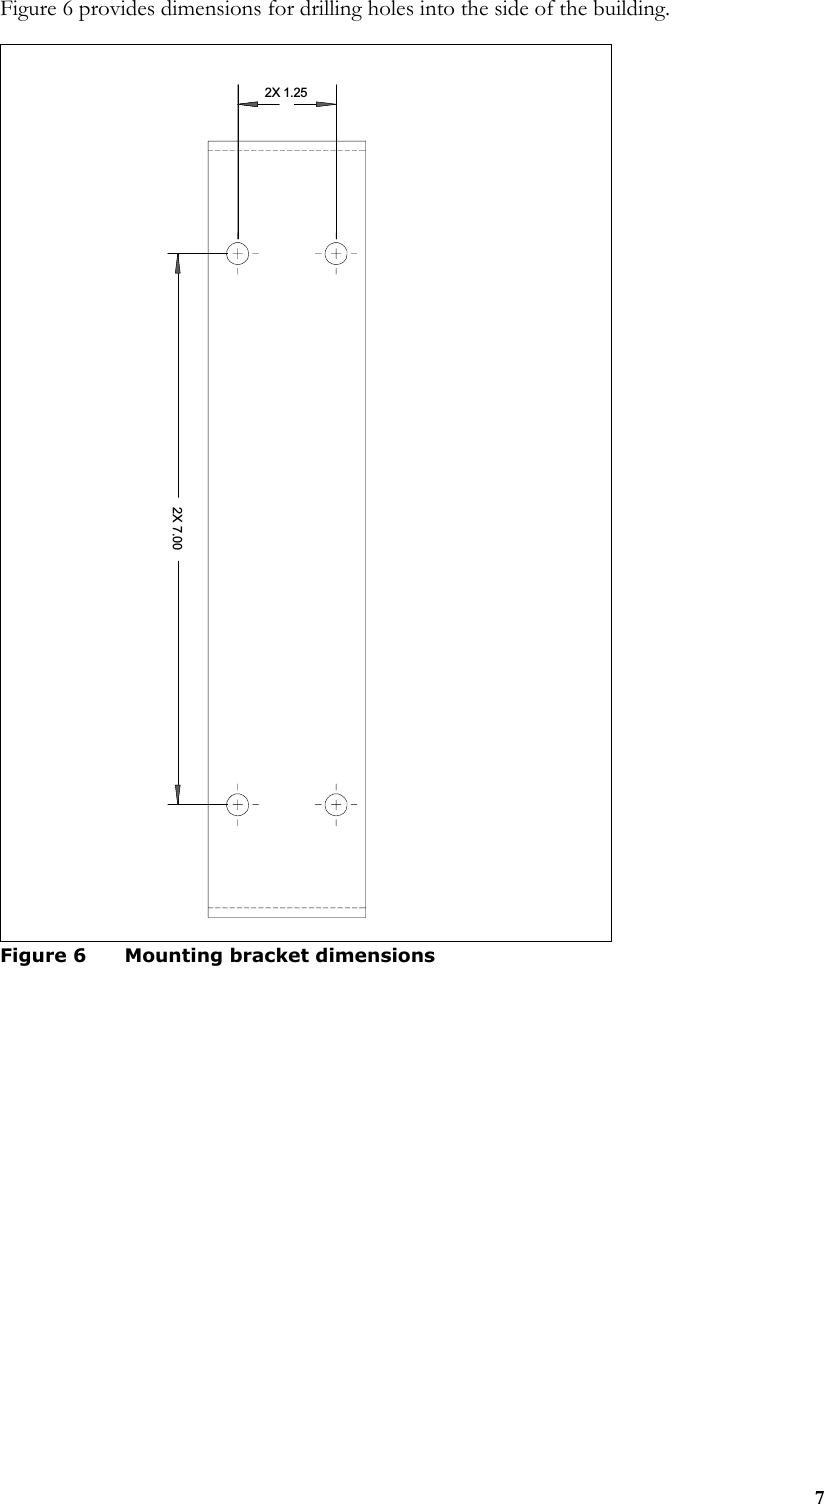 7Figure 6 provides dimensions for drilling holes into the side of the building.Figure 6 Mounting bracket dimensions2X 1.252X 7.00